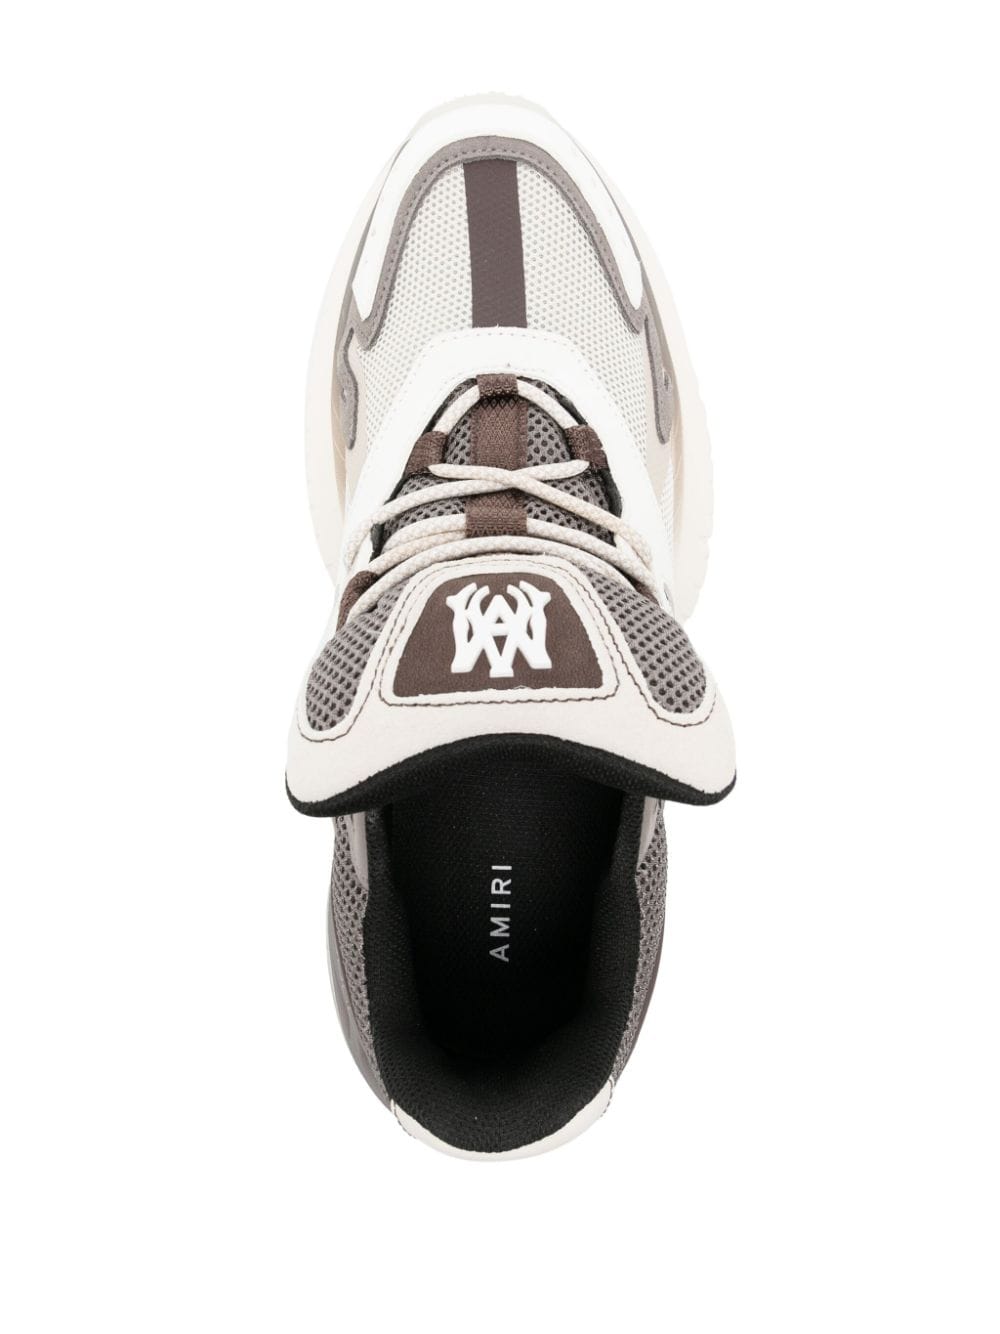 MA Runner leather sneakers